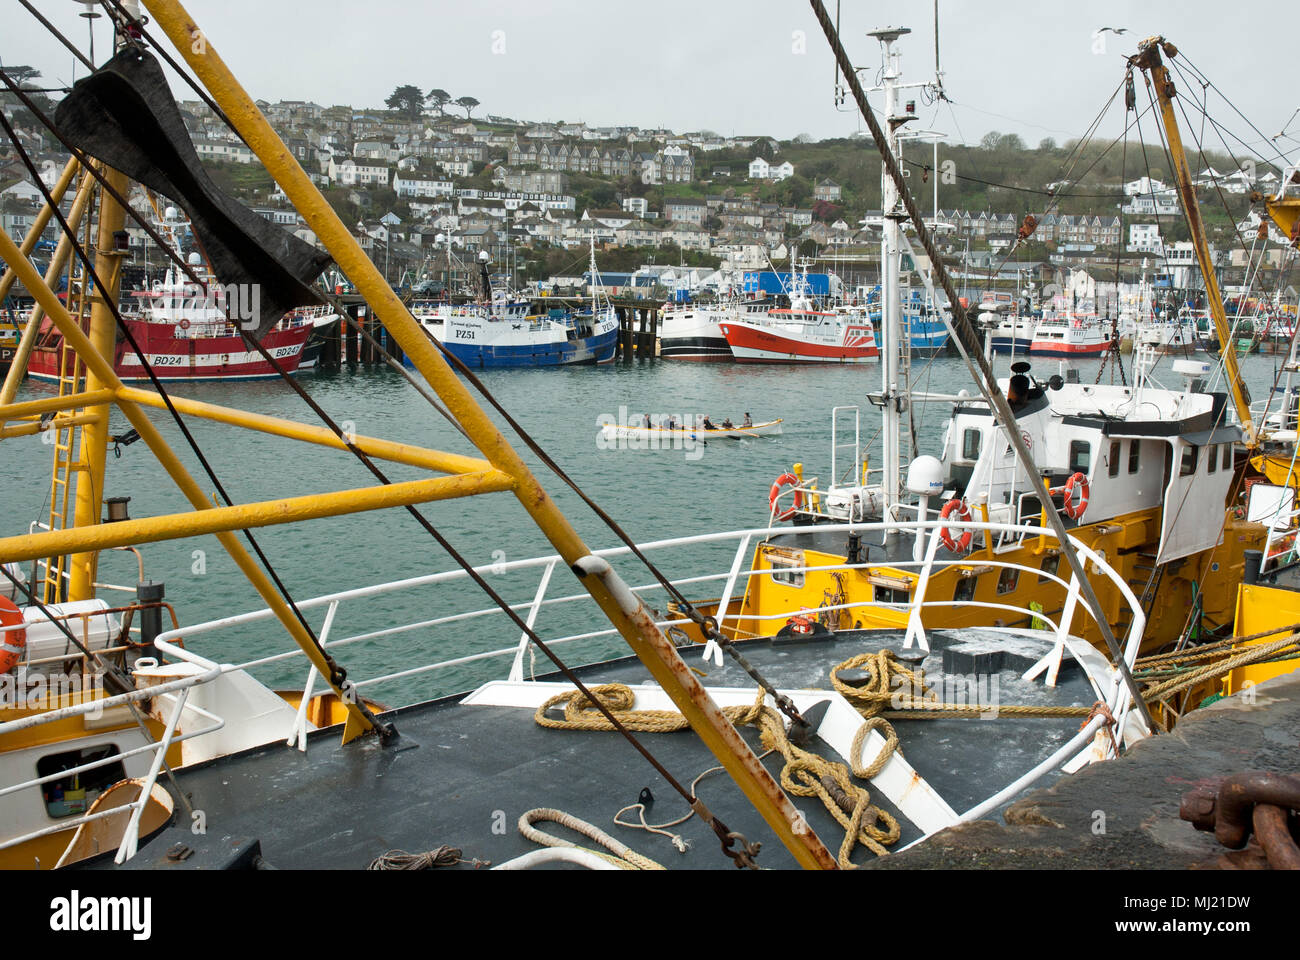 Beam trawlers in the foreground with the traditional gig practicing behind and more colourful fishing boats and Newlyn Town in the background. Stock Photo